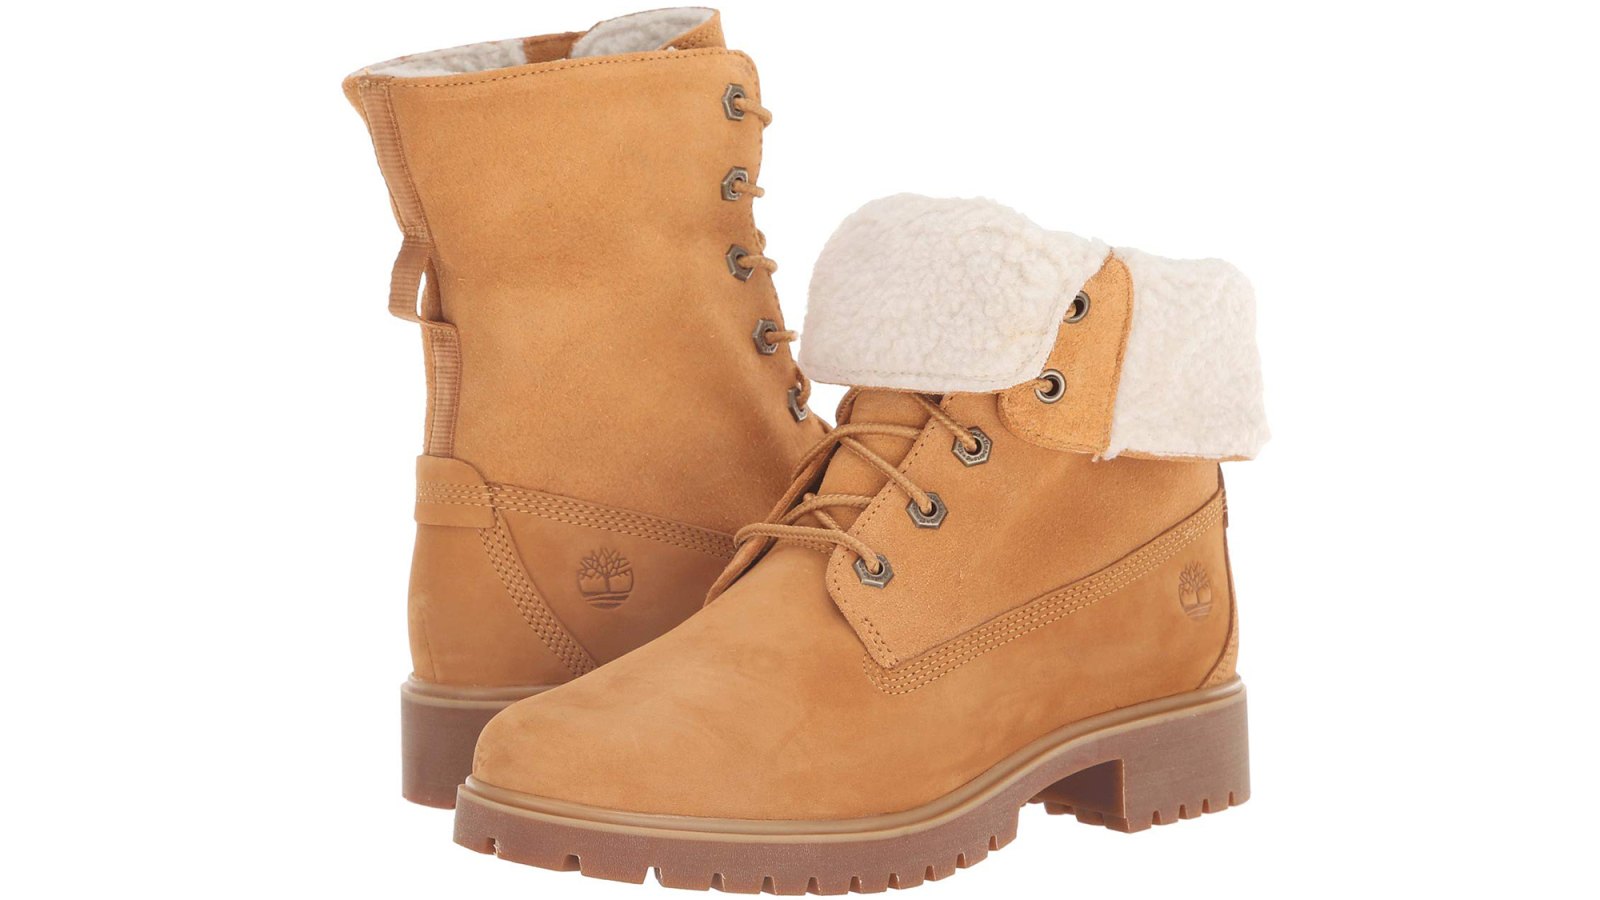 These 'Sleek Comfortable' Boots Will Be 'Go-To'